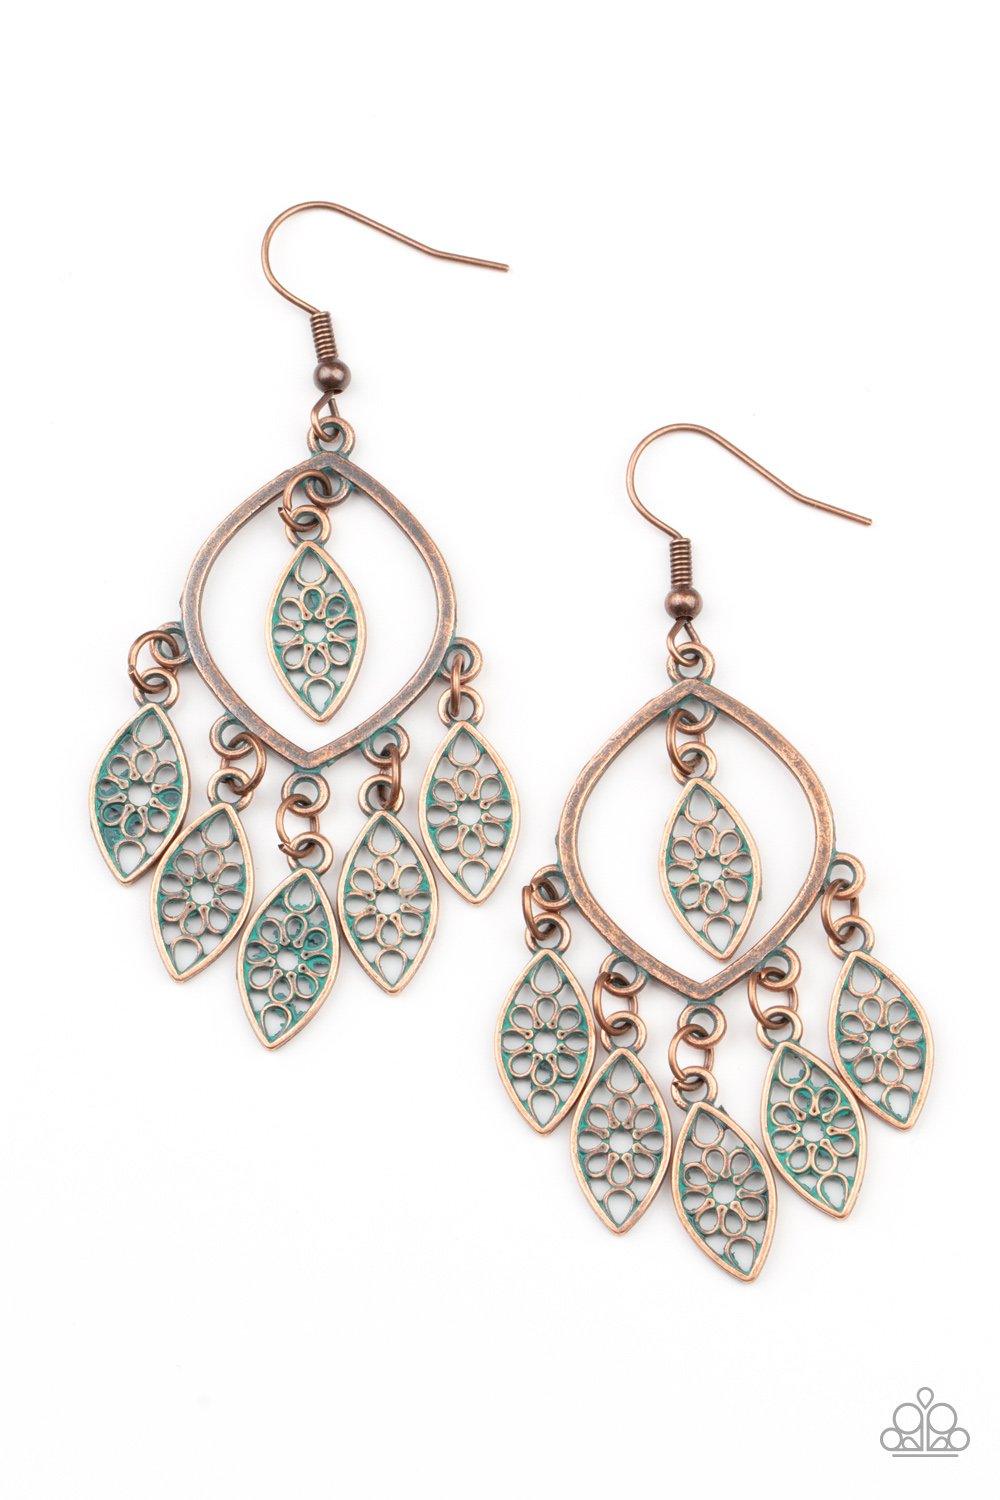 Paparazzi Accessories Artisan Garden - Copper Brushed in a patina finish, dainty floral copper frames swing from the bottom and top of an airy copper frame, creating a rustic fringe. Earring attaches to a standard fishhook fitting. Sold as one pair of ear